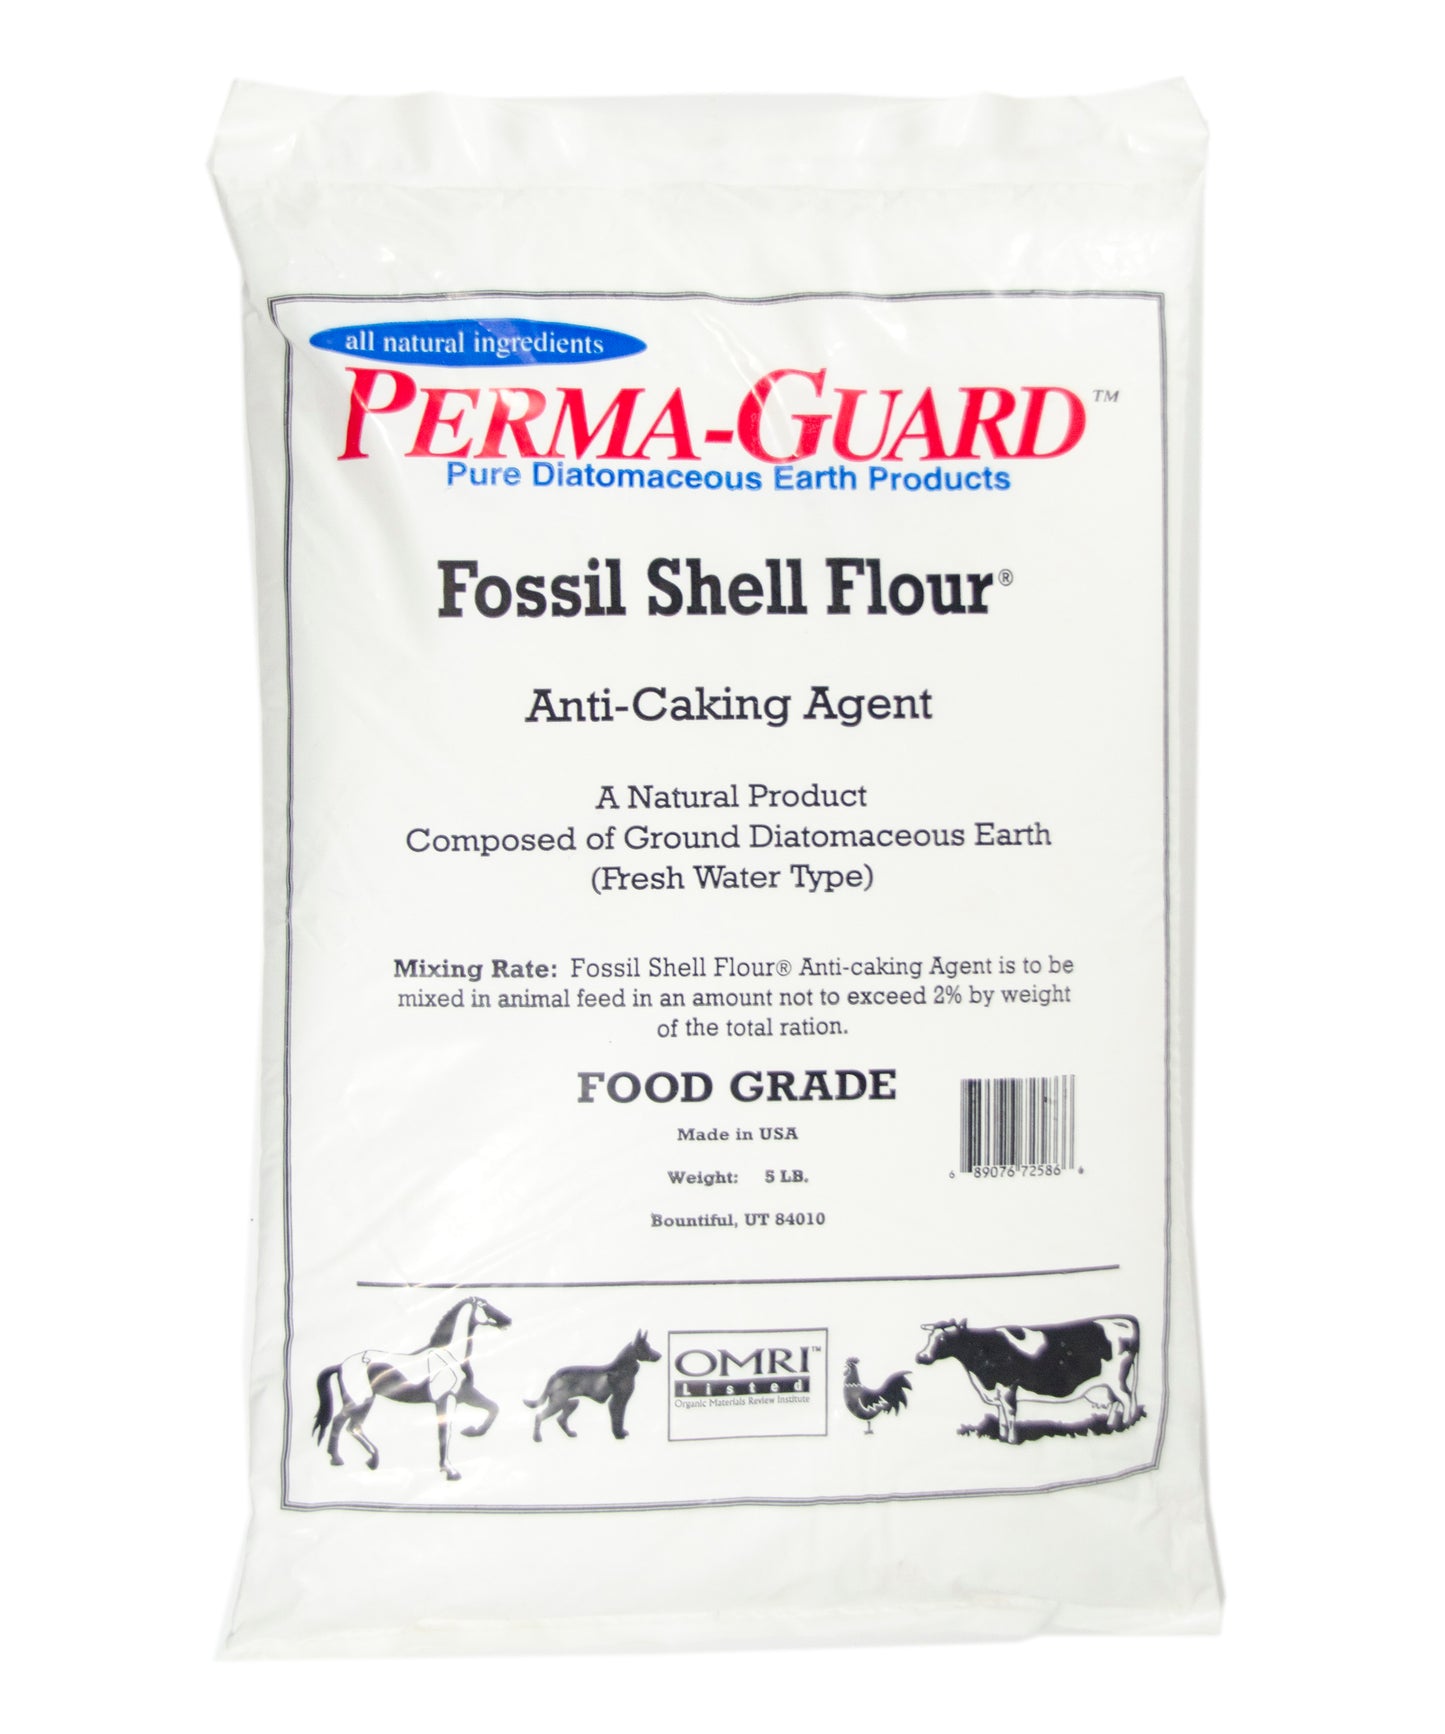 Perma Guard: Pure Diatomaceous Earth Products. Fossil Shell Flour. Anti-Caking agent. All natural product composed of ground diatomaceous earth (fresh water type) Food Grade